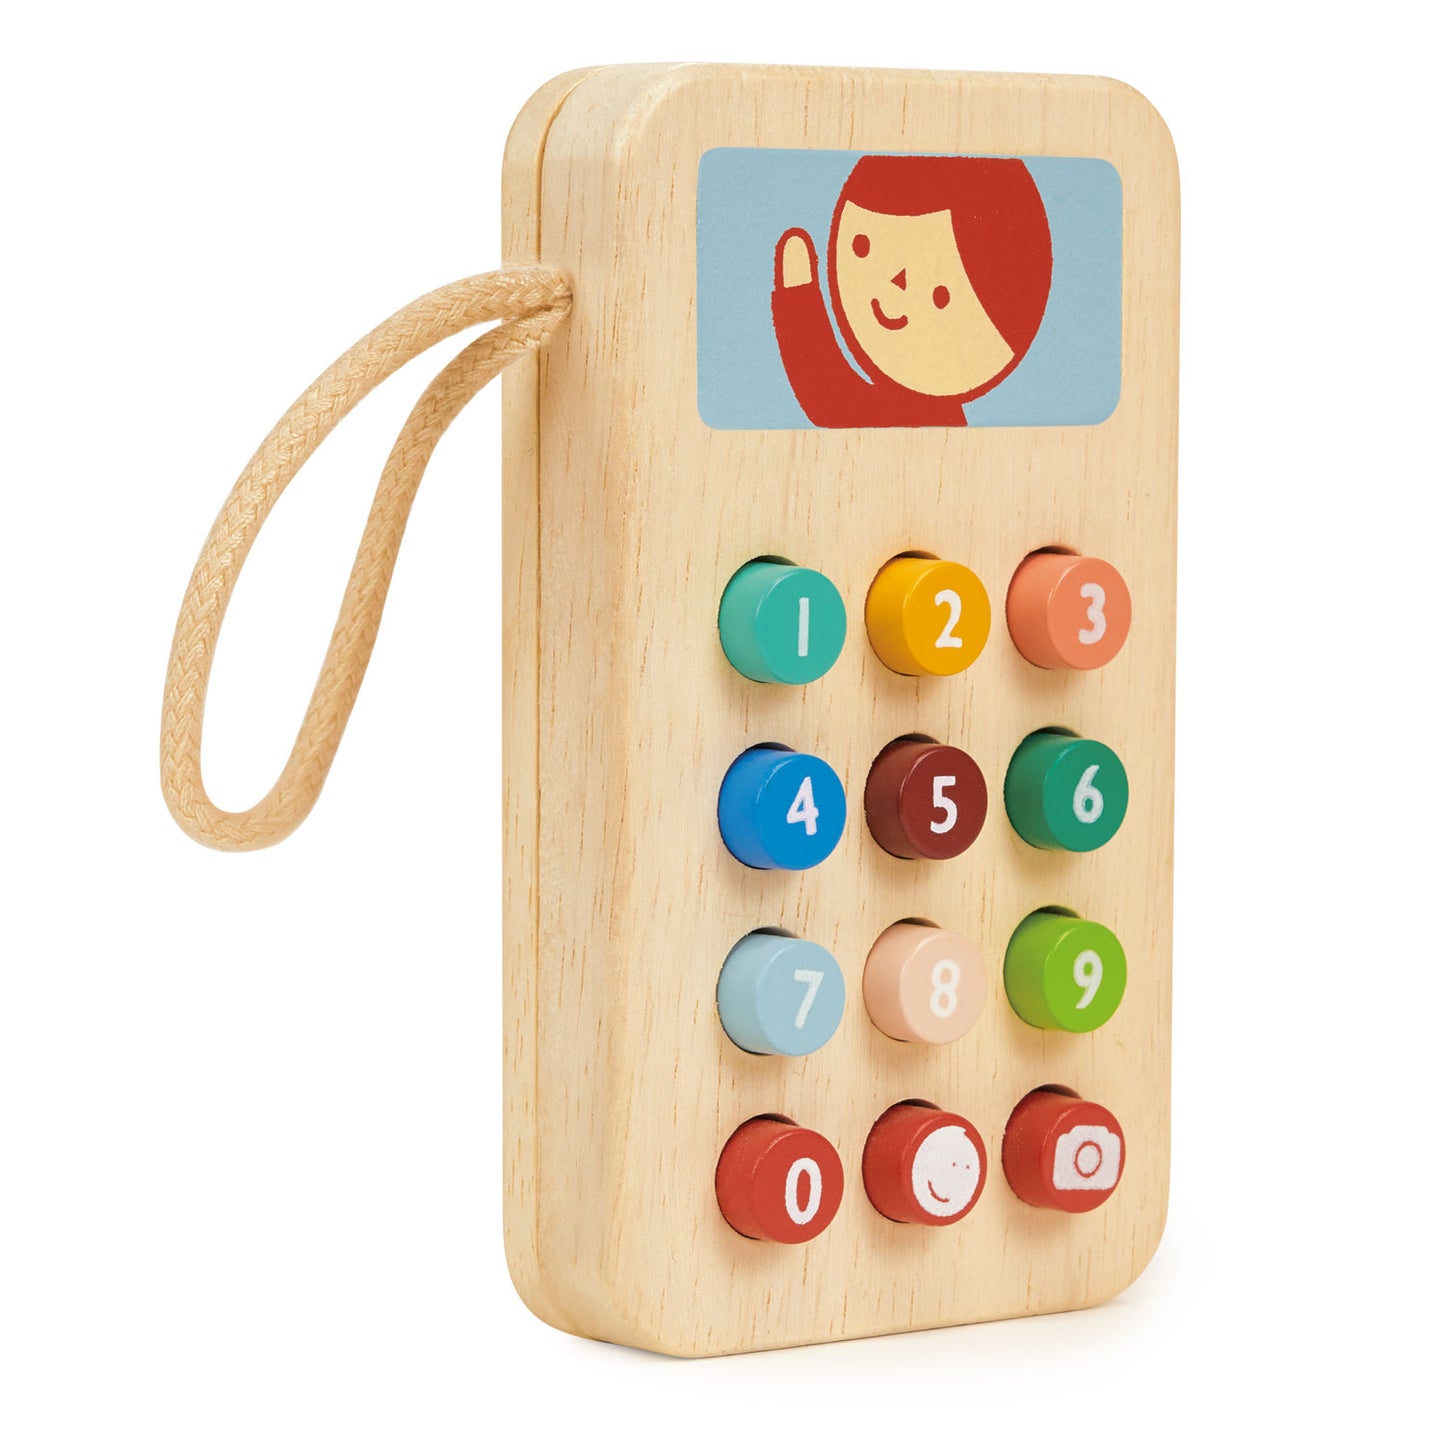 Mobile Phone | Wooden Pretend Play Toy For Kids